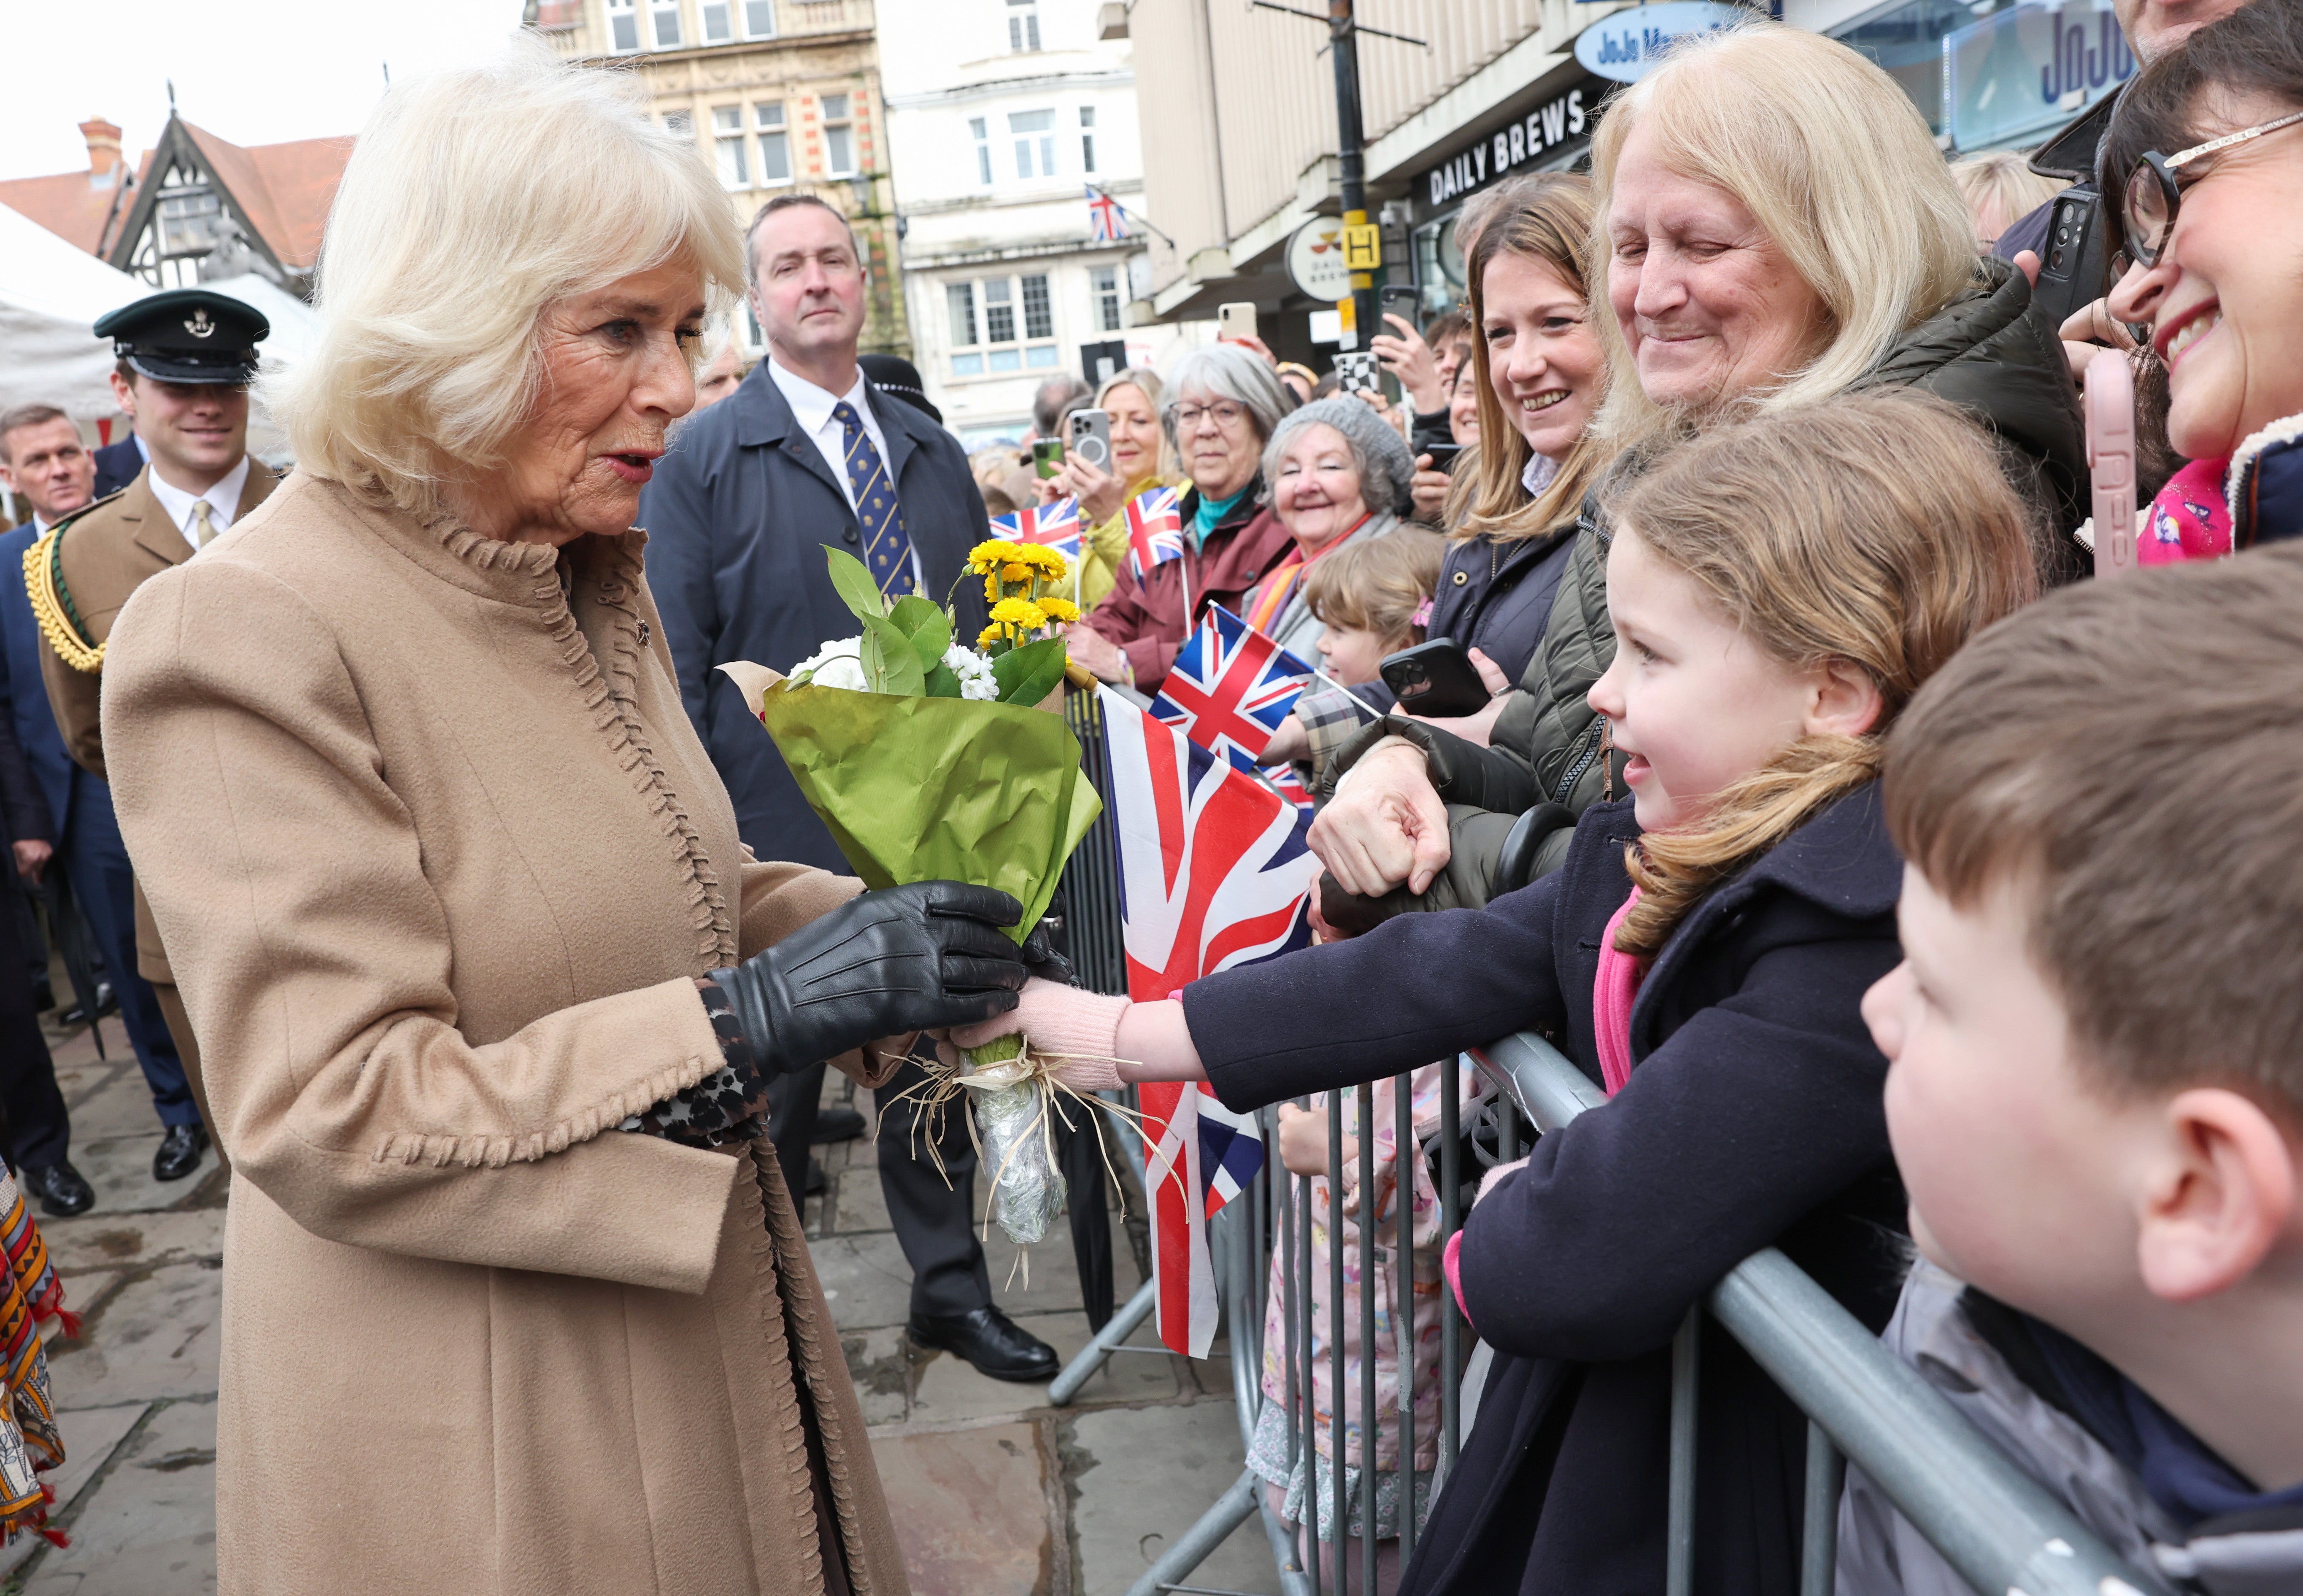 Well-wishers came out in their thousands to meet the Queen as she visited Shrewsbury